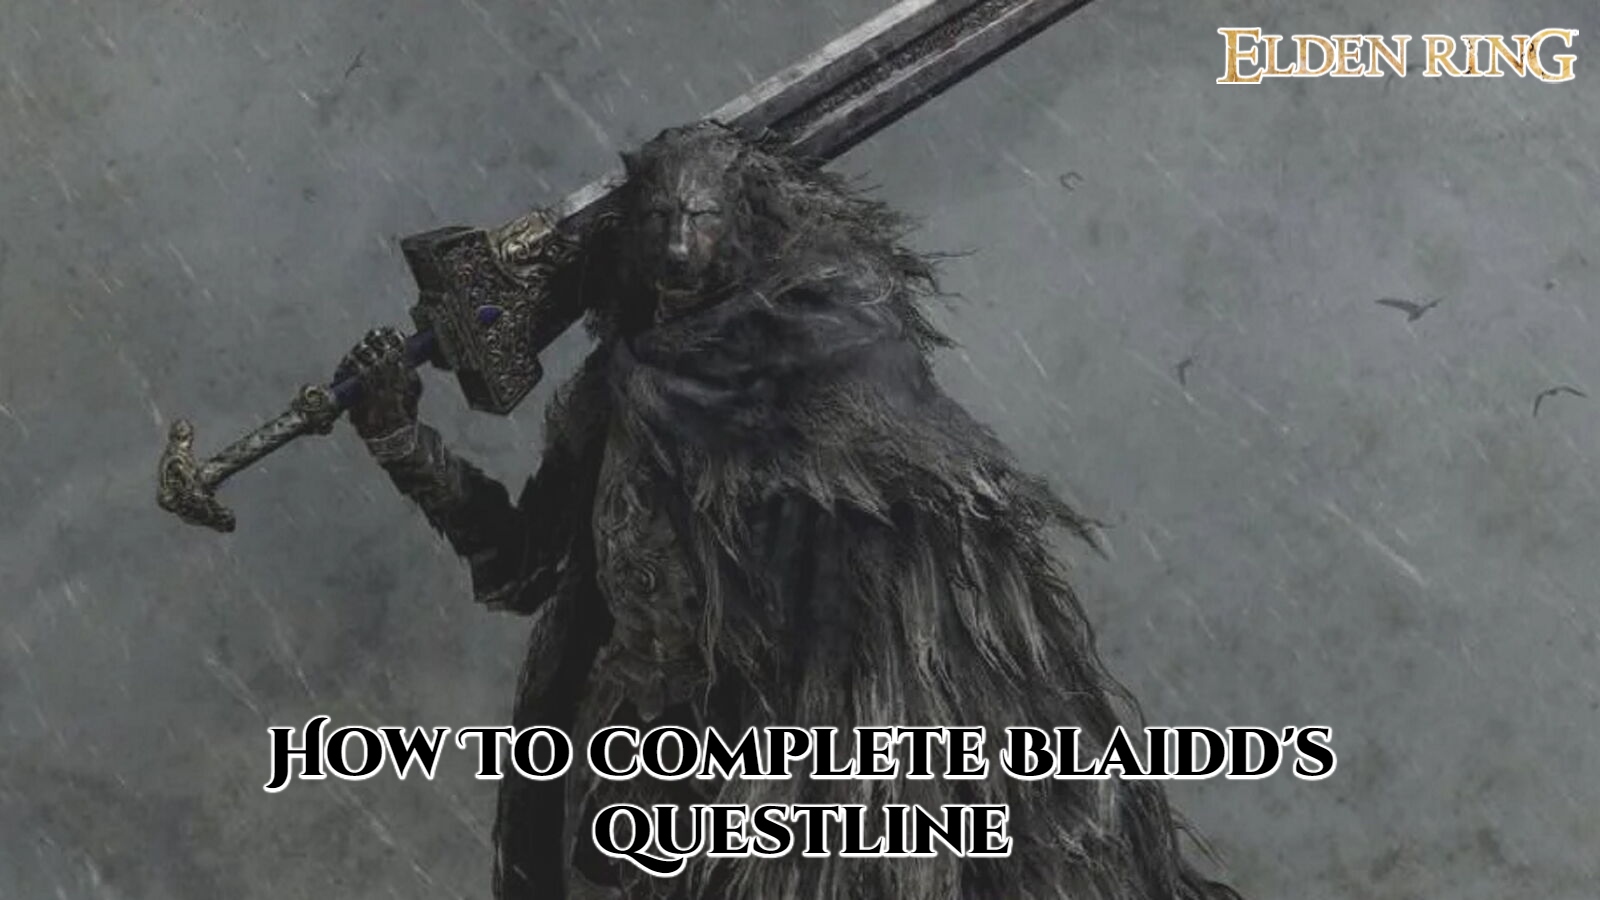 You are currently viewing How To complete Blaidd’s questline in Elden Ring